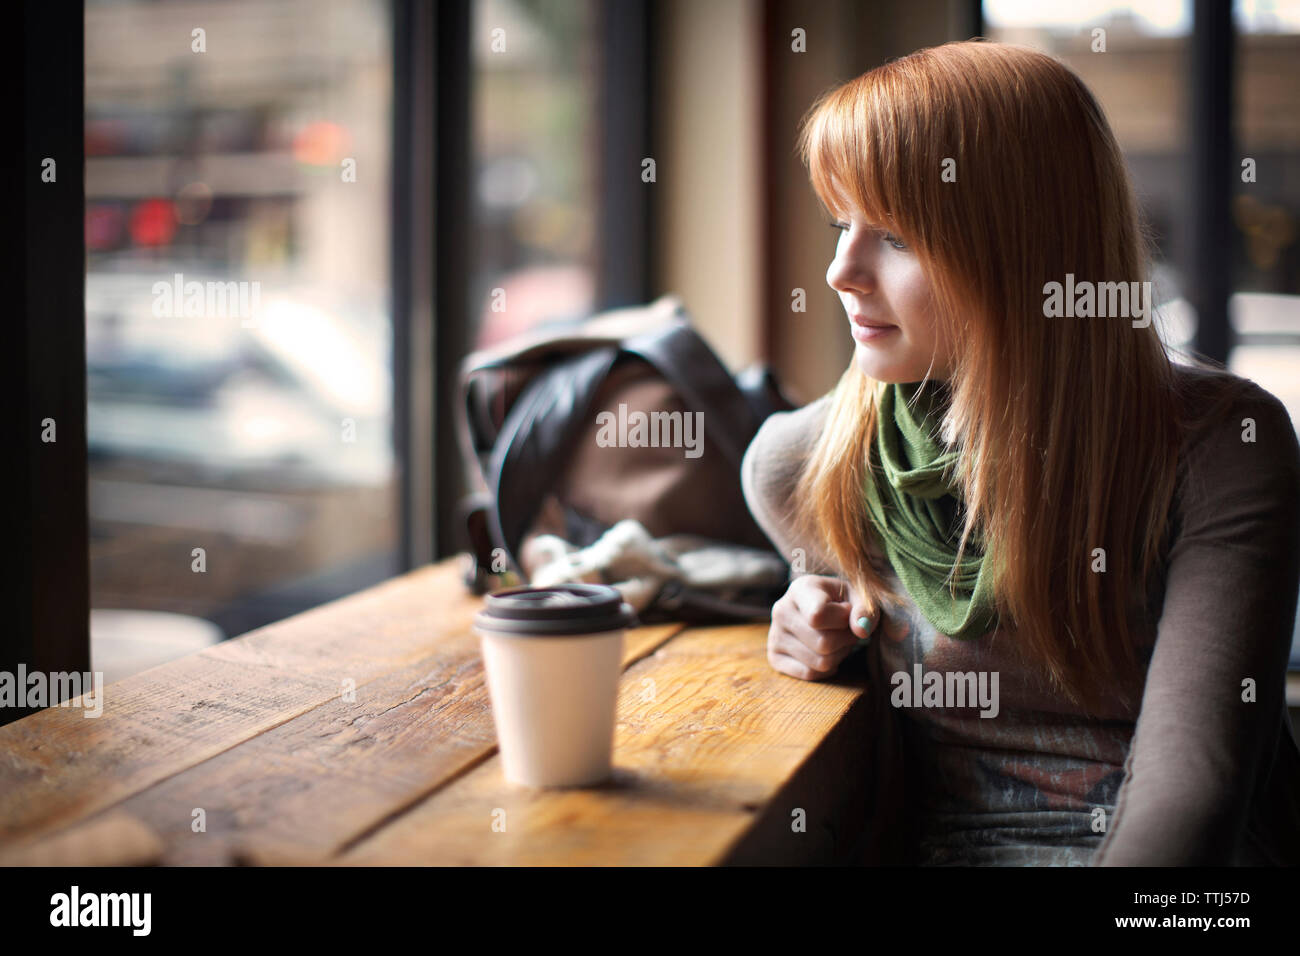 Woman looking down while sitting in cafe Stock Photo